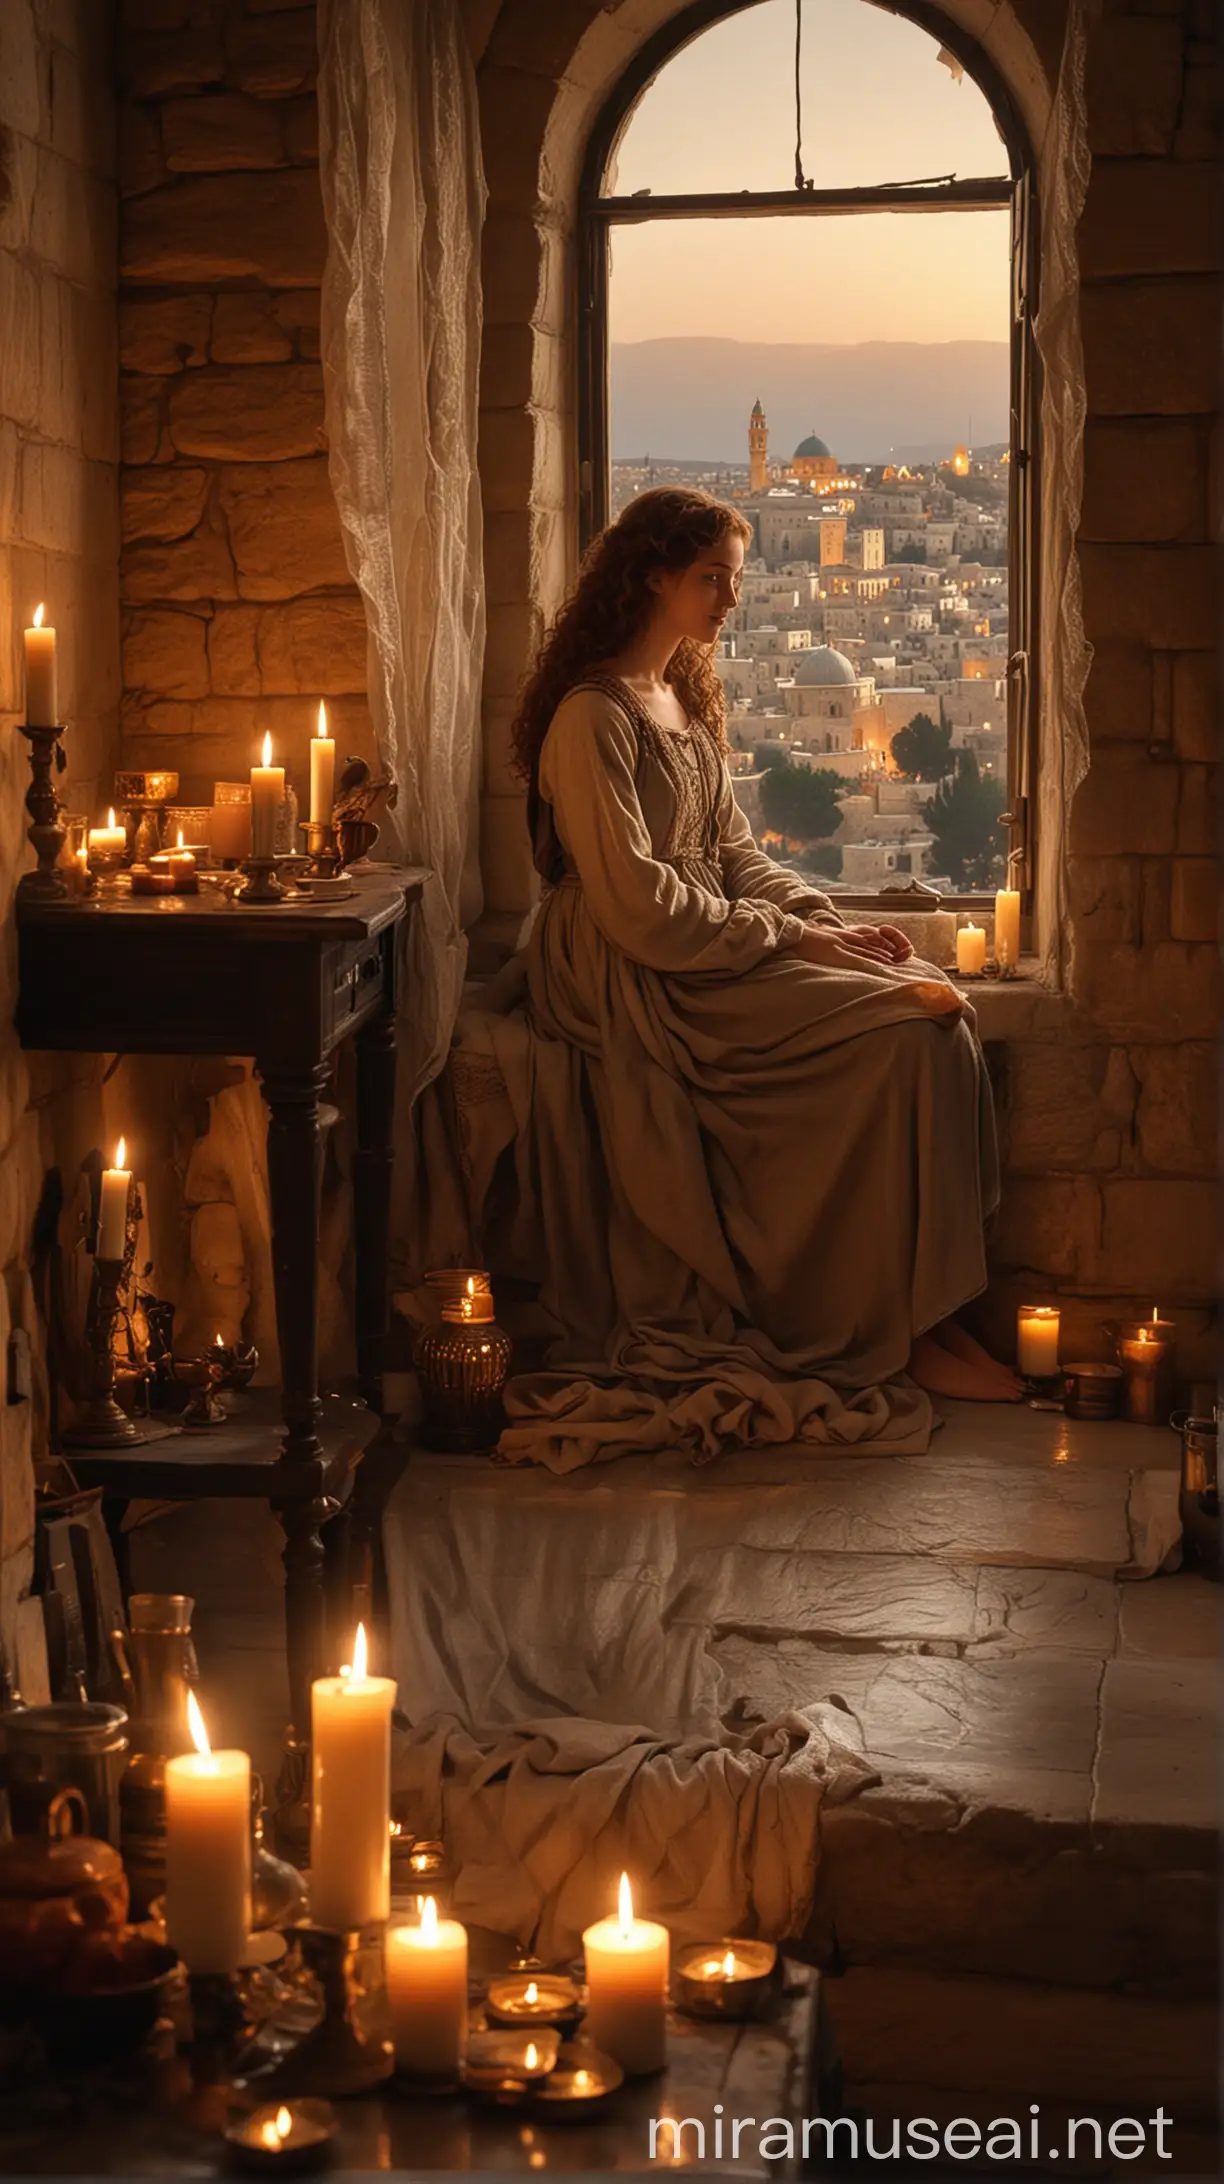 Ancient Roman Era Mother and Daughter in Candlelit Jerusalem Scene